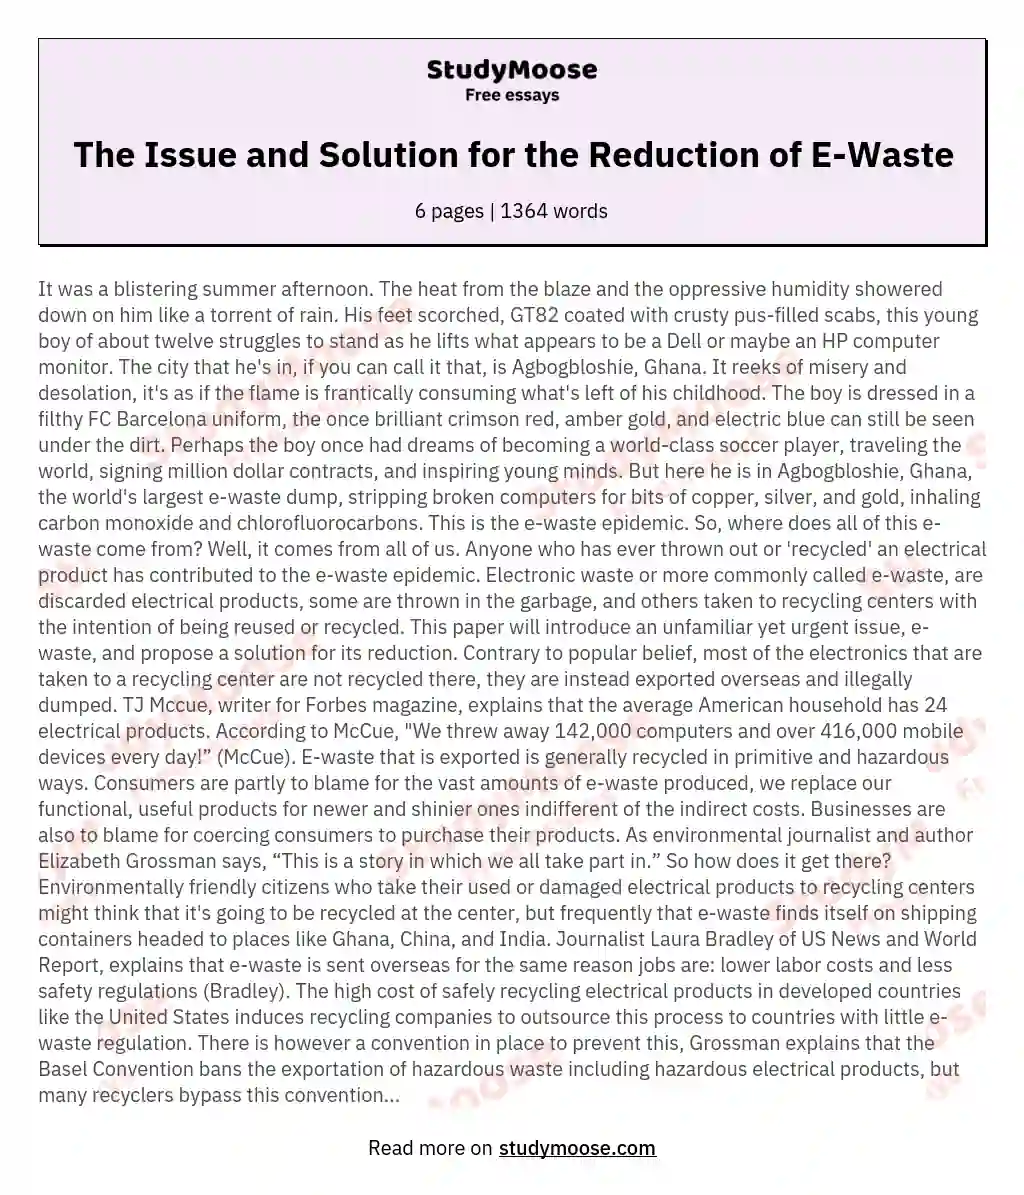 The Issue and Solution for the Reduction of E-Waste essay